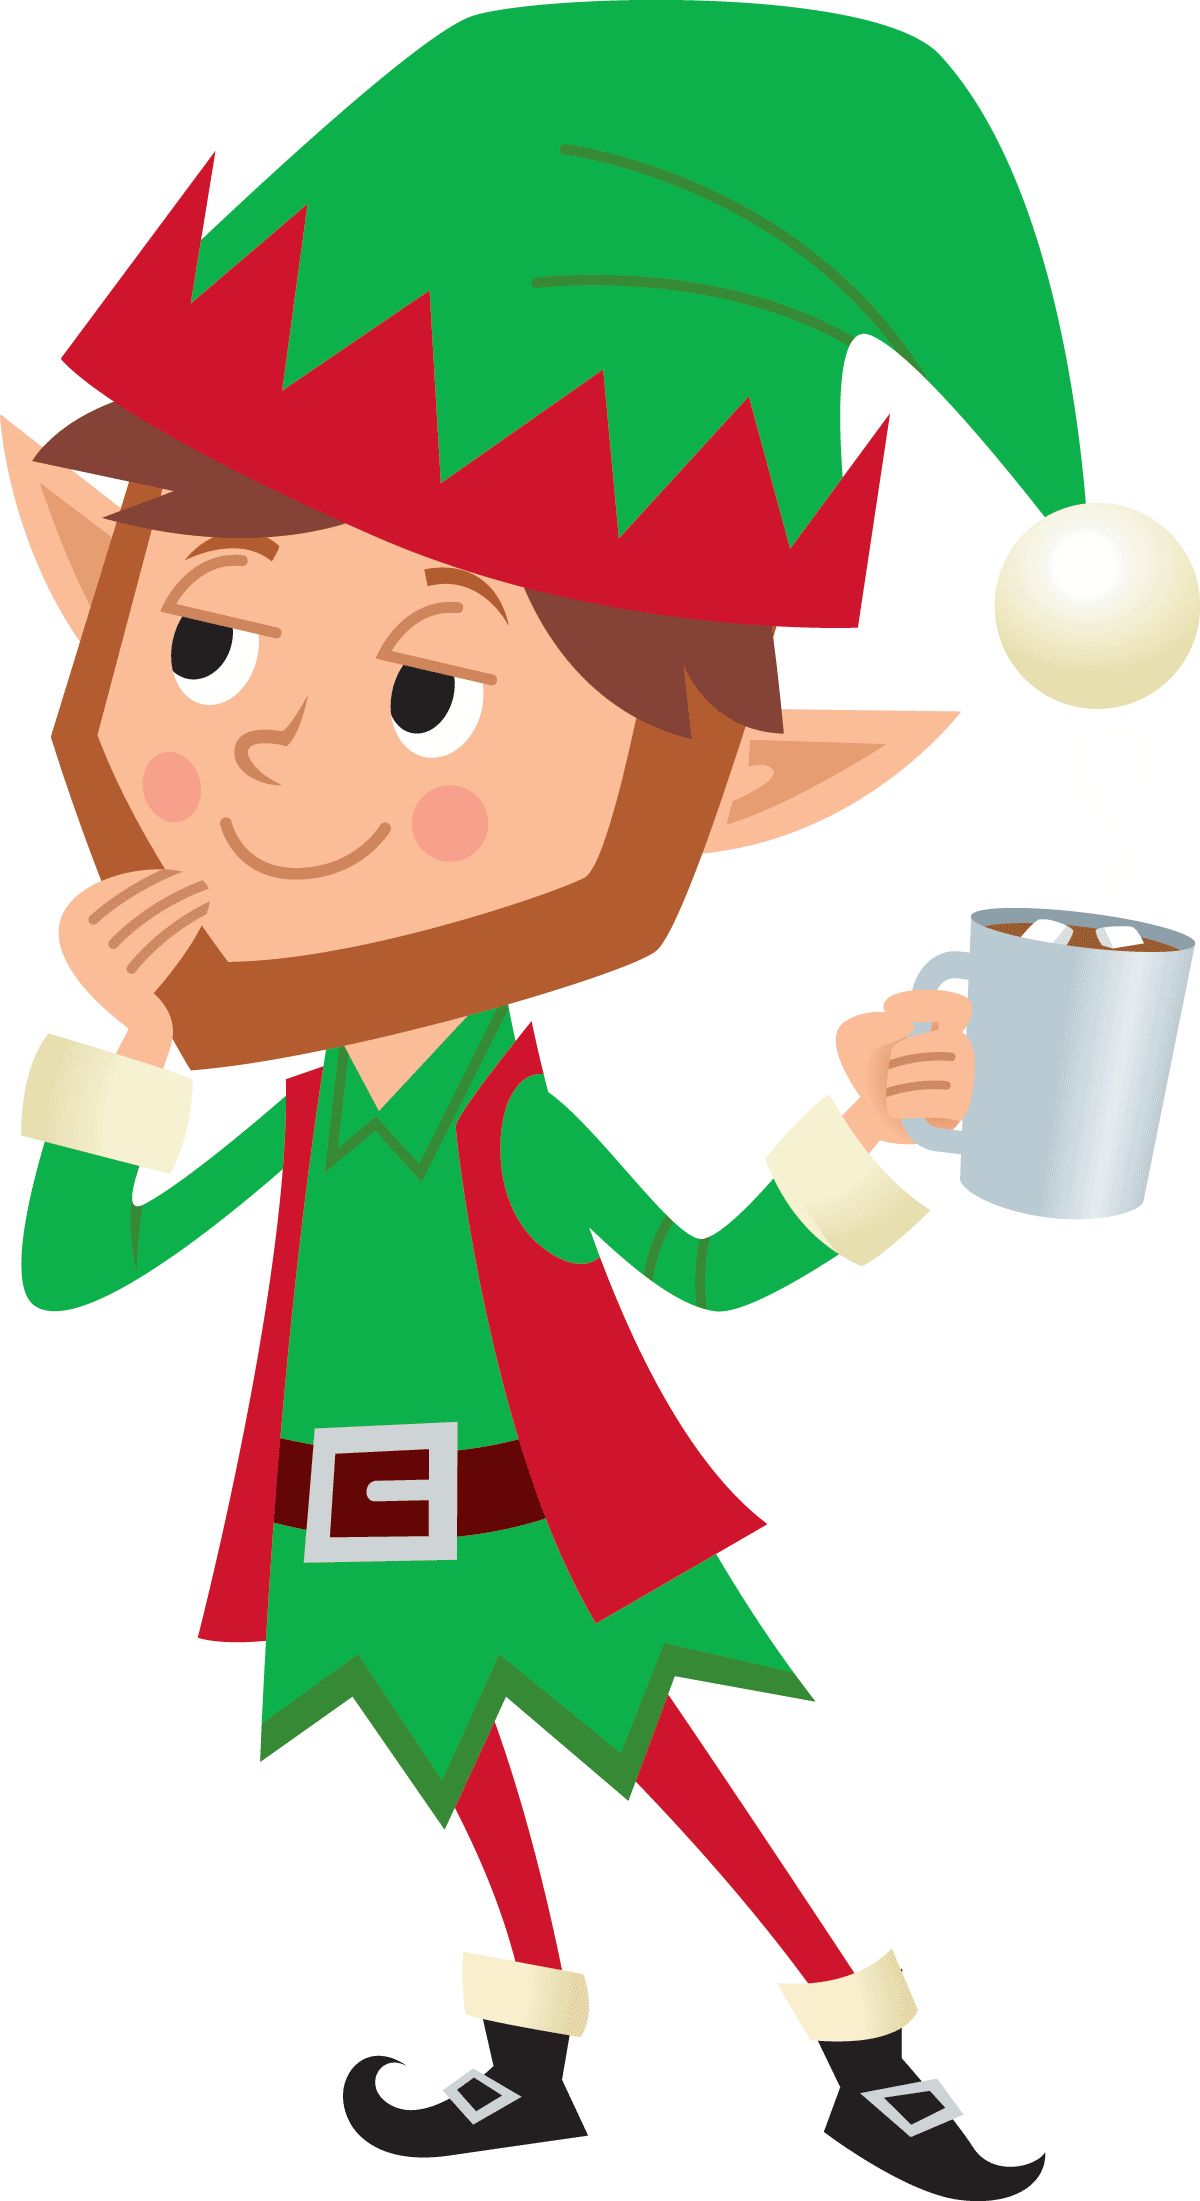 An Elves Day Off - Follow along on the adventure of an elf enjoying his day off from making toys for all of the children of the world.